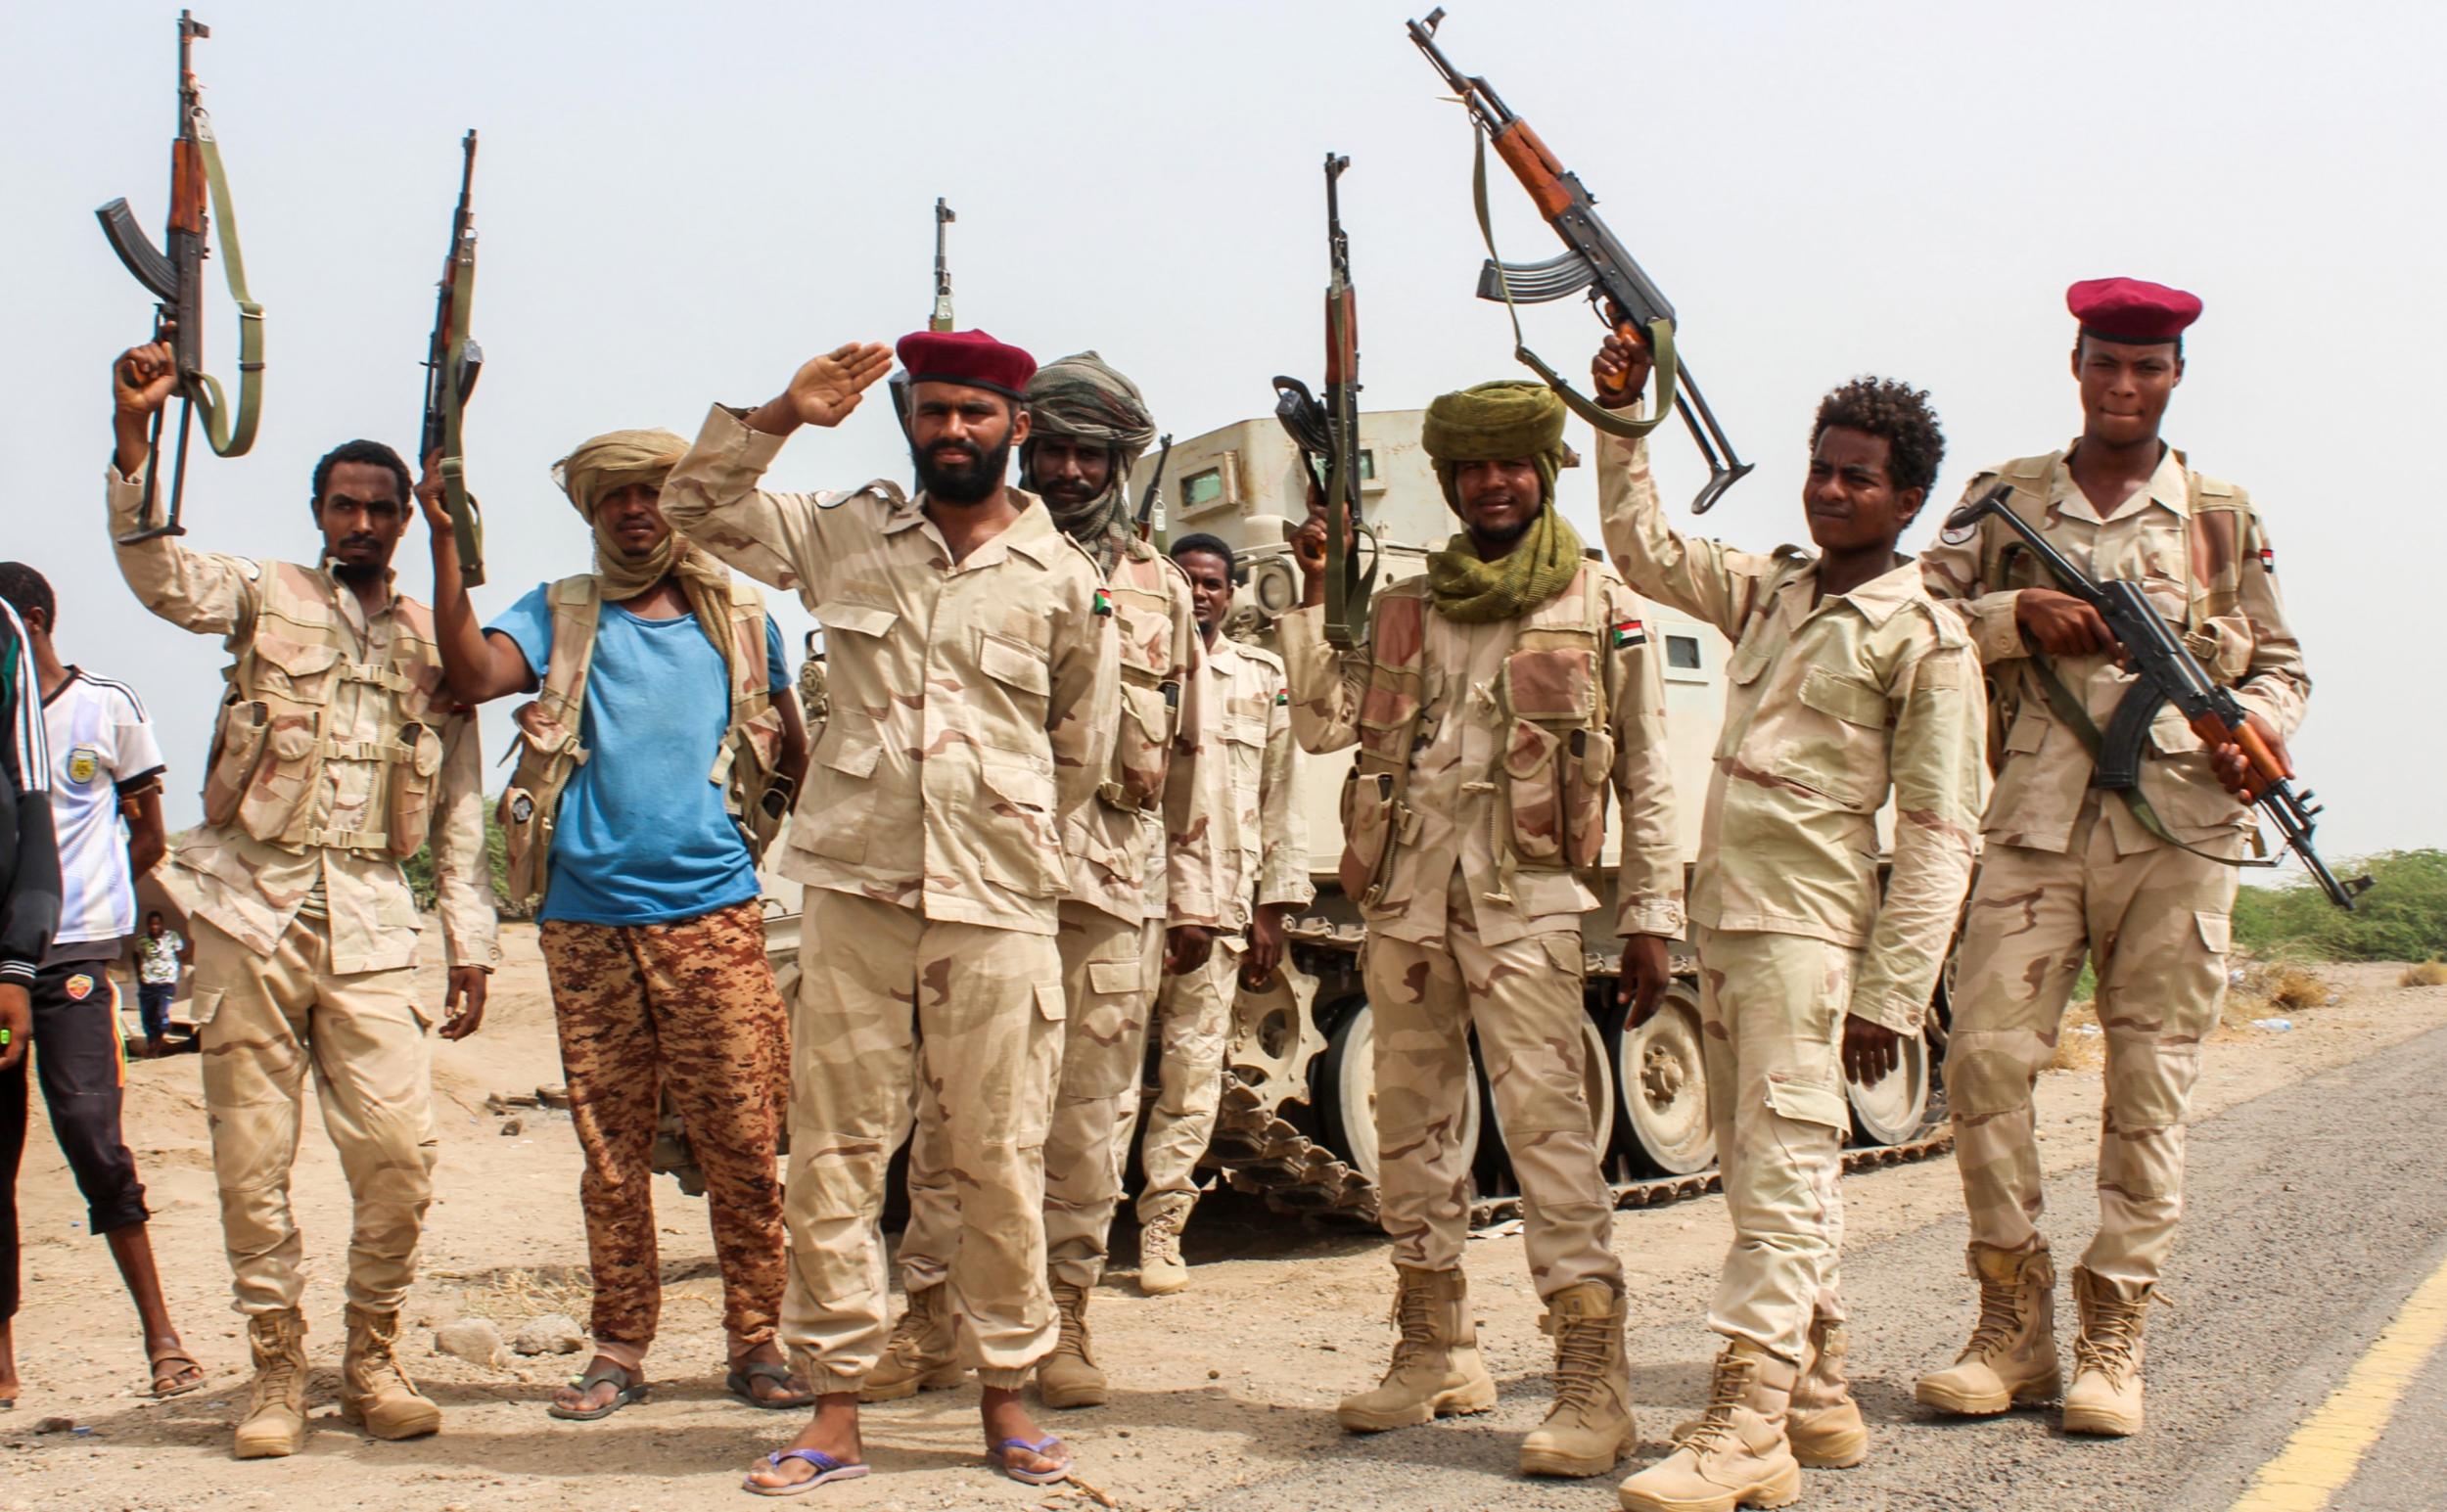 Sudanese soldiers fighting alongside Yemen’s Saudi-backed pro-government forces